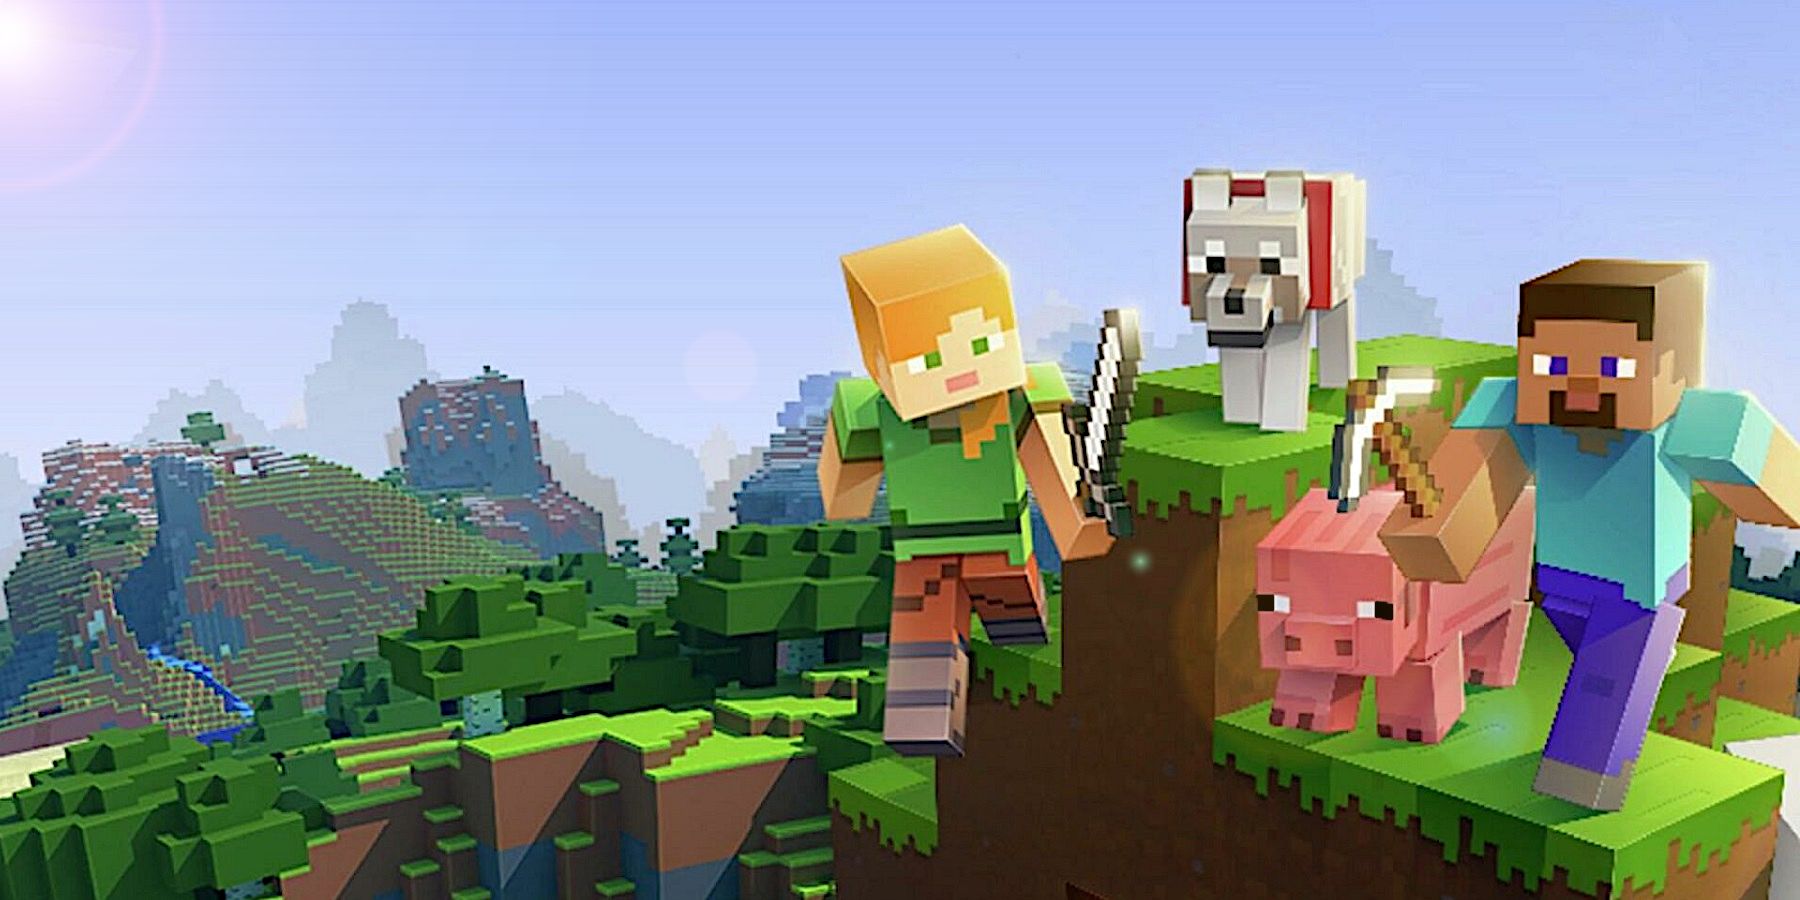 Image from Minecraft showing Steve and other characters on top of a green hill.